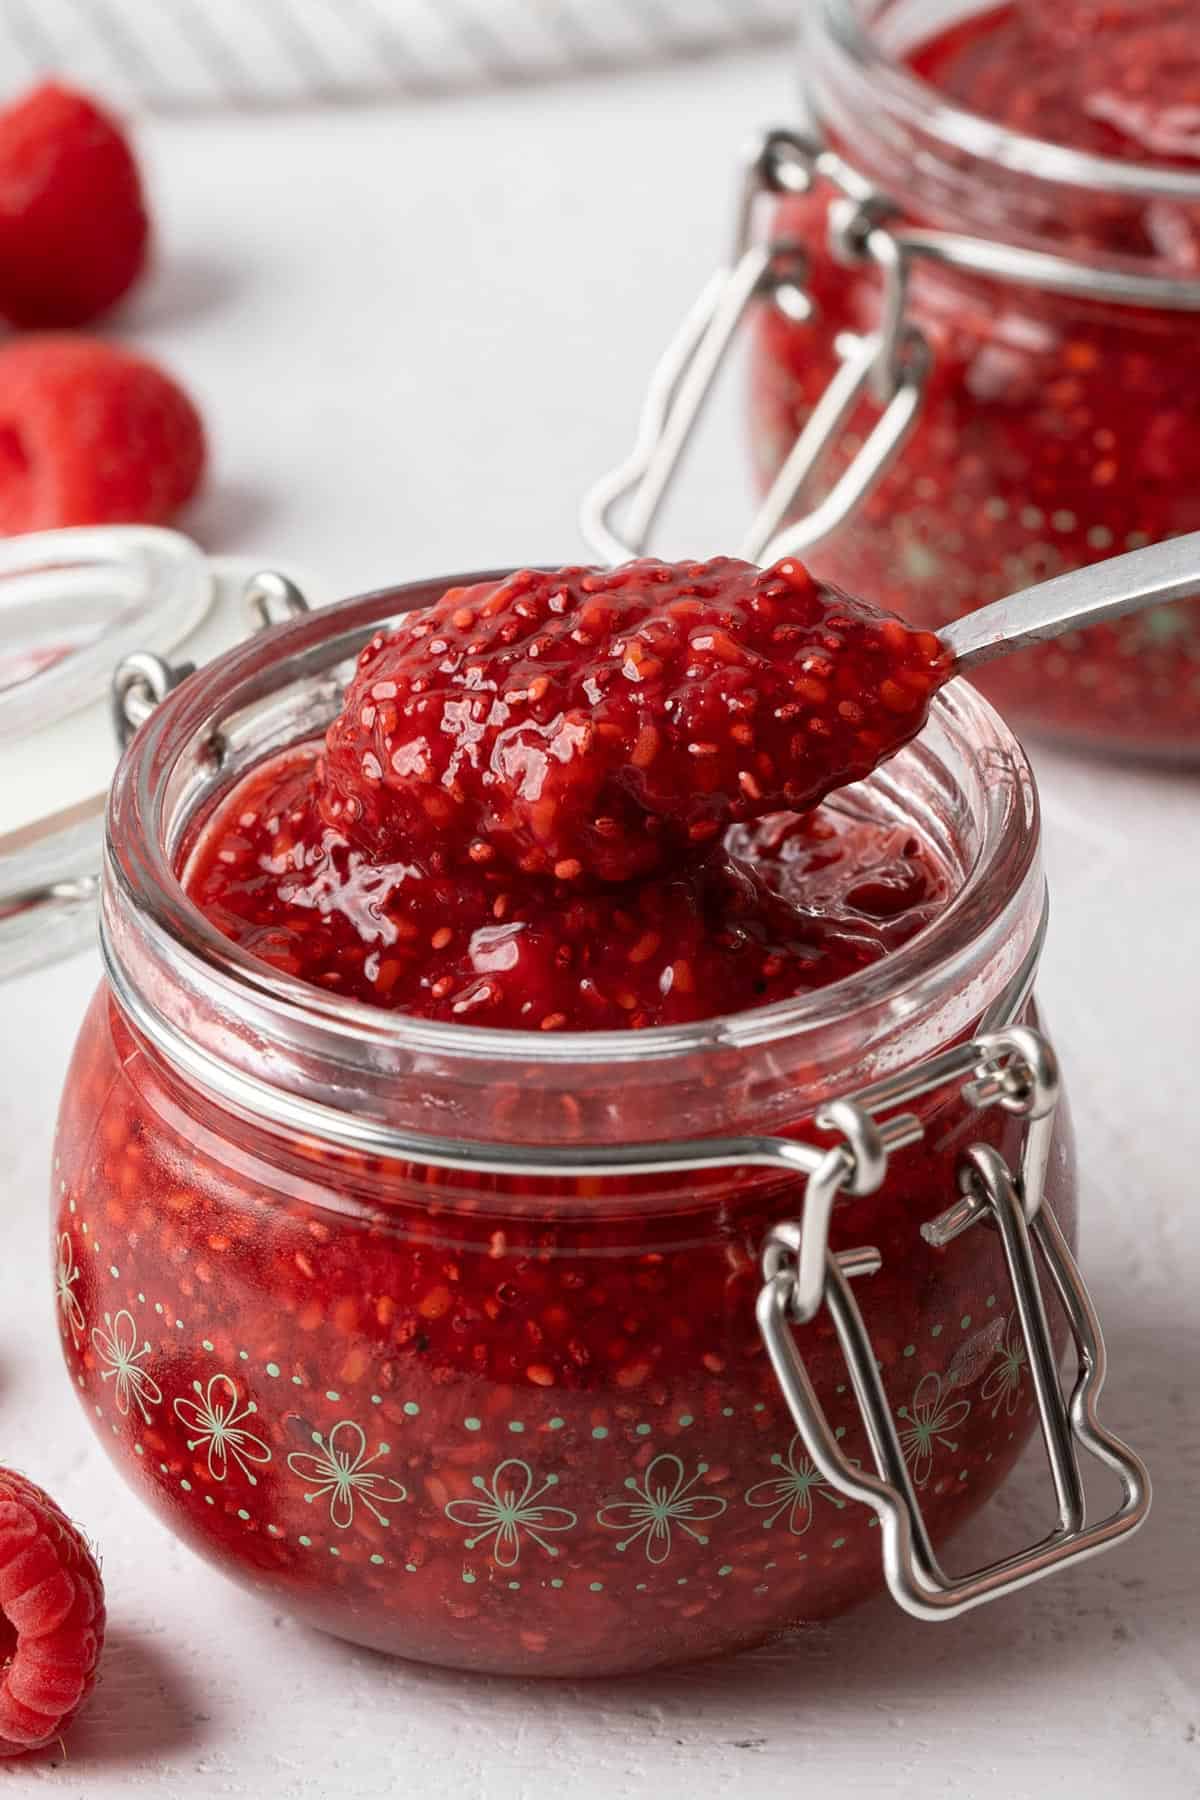 Spooning raspberry chia seed jam from a jar.